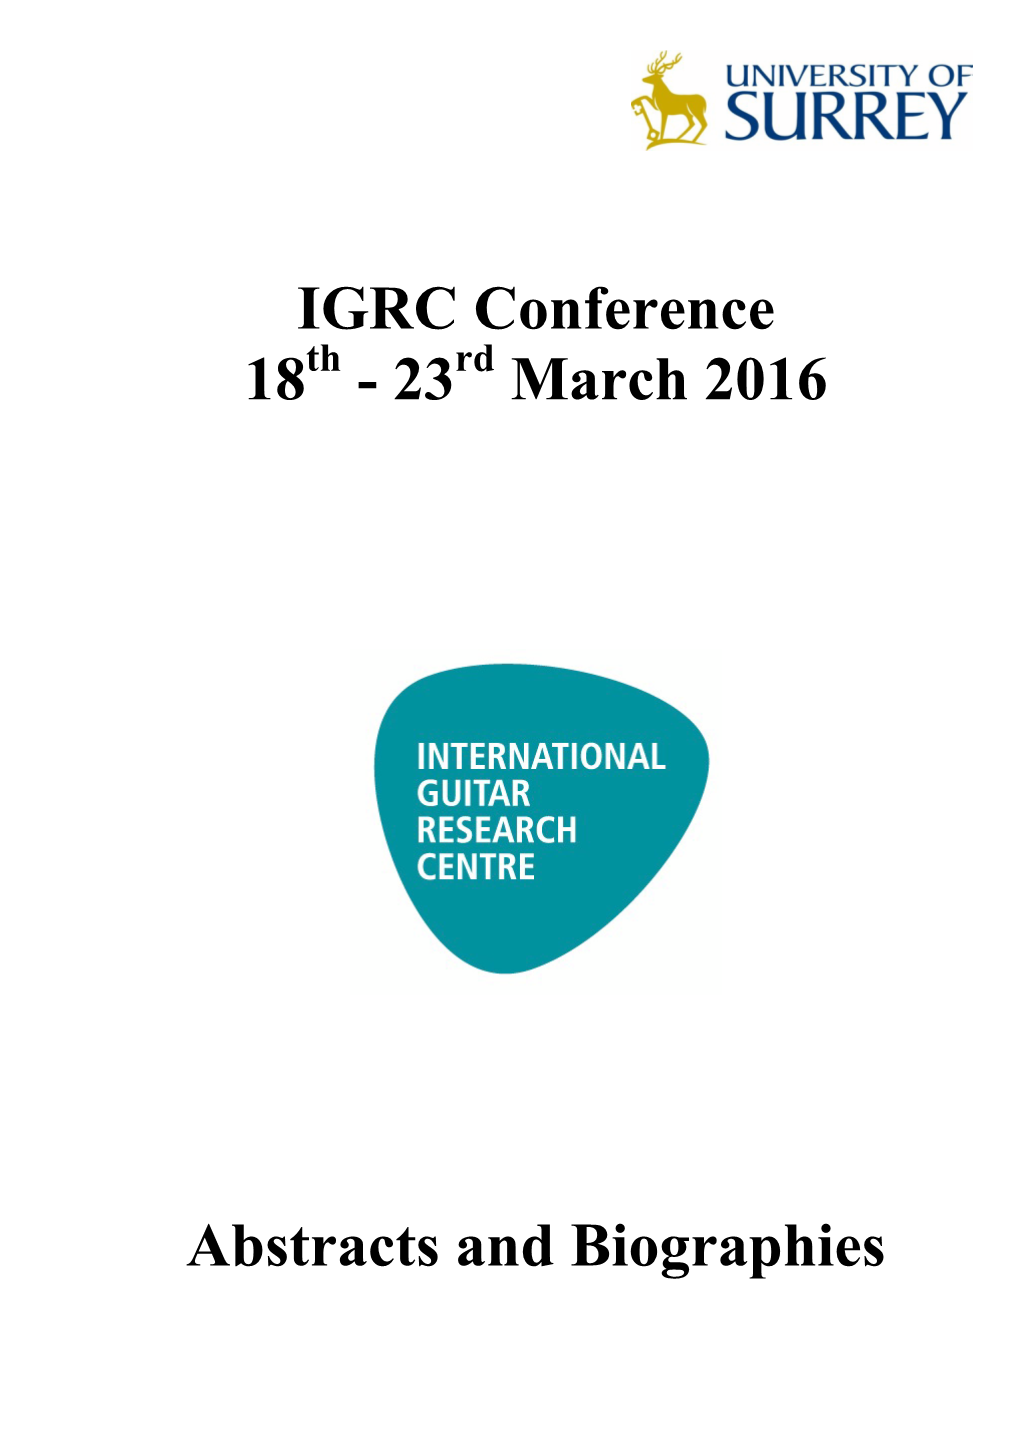 IGRC Conference 18Th - 23Rd March 2016